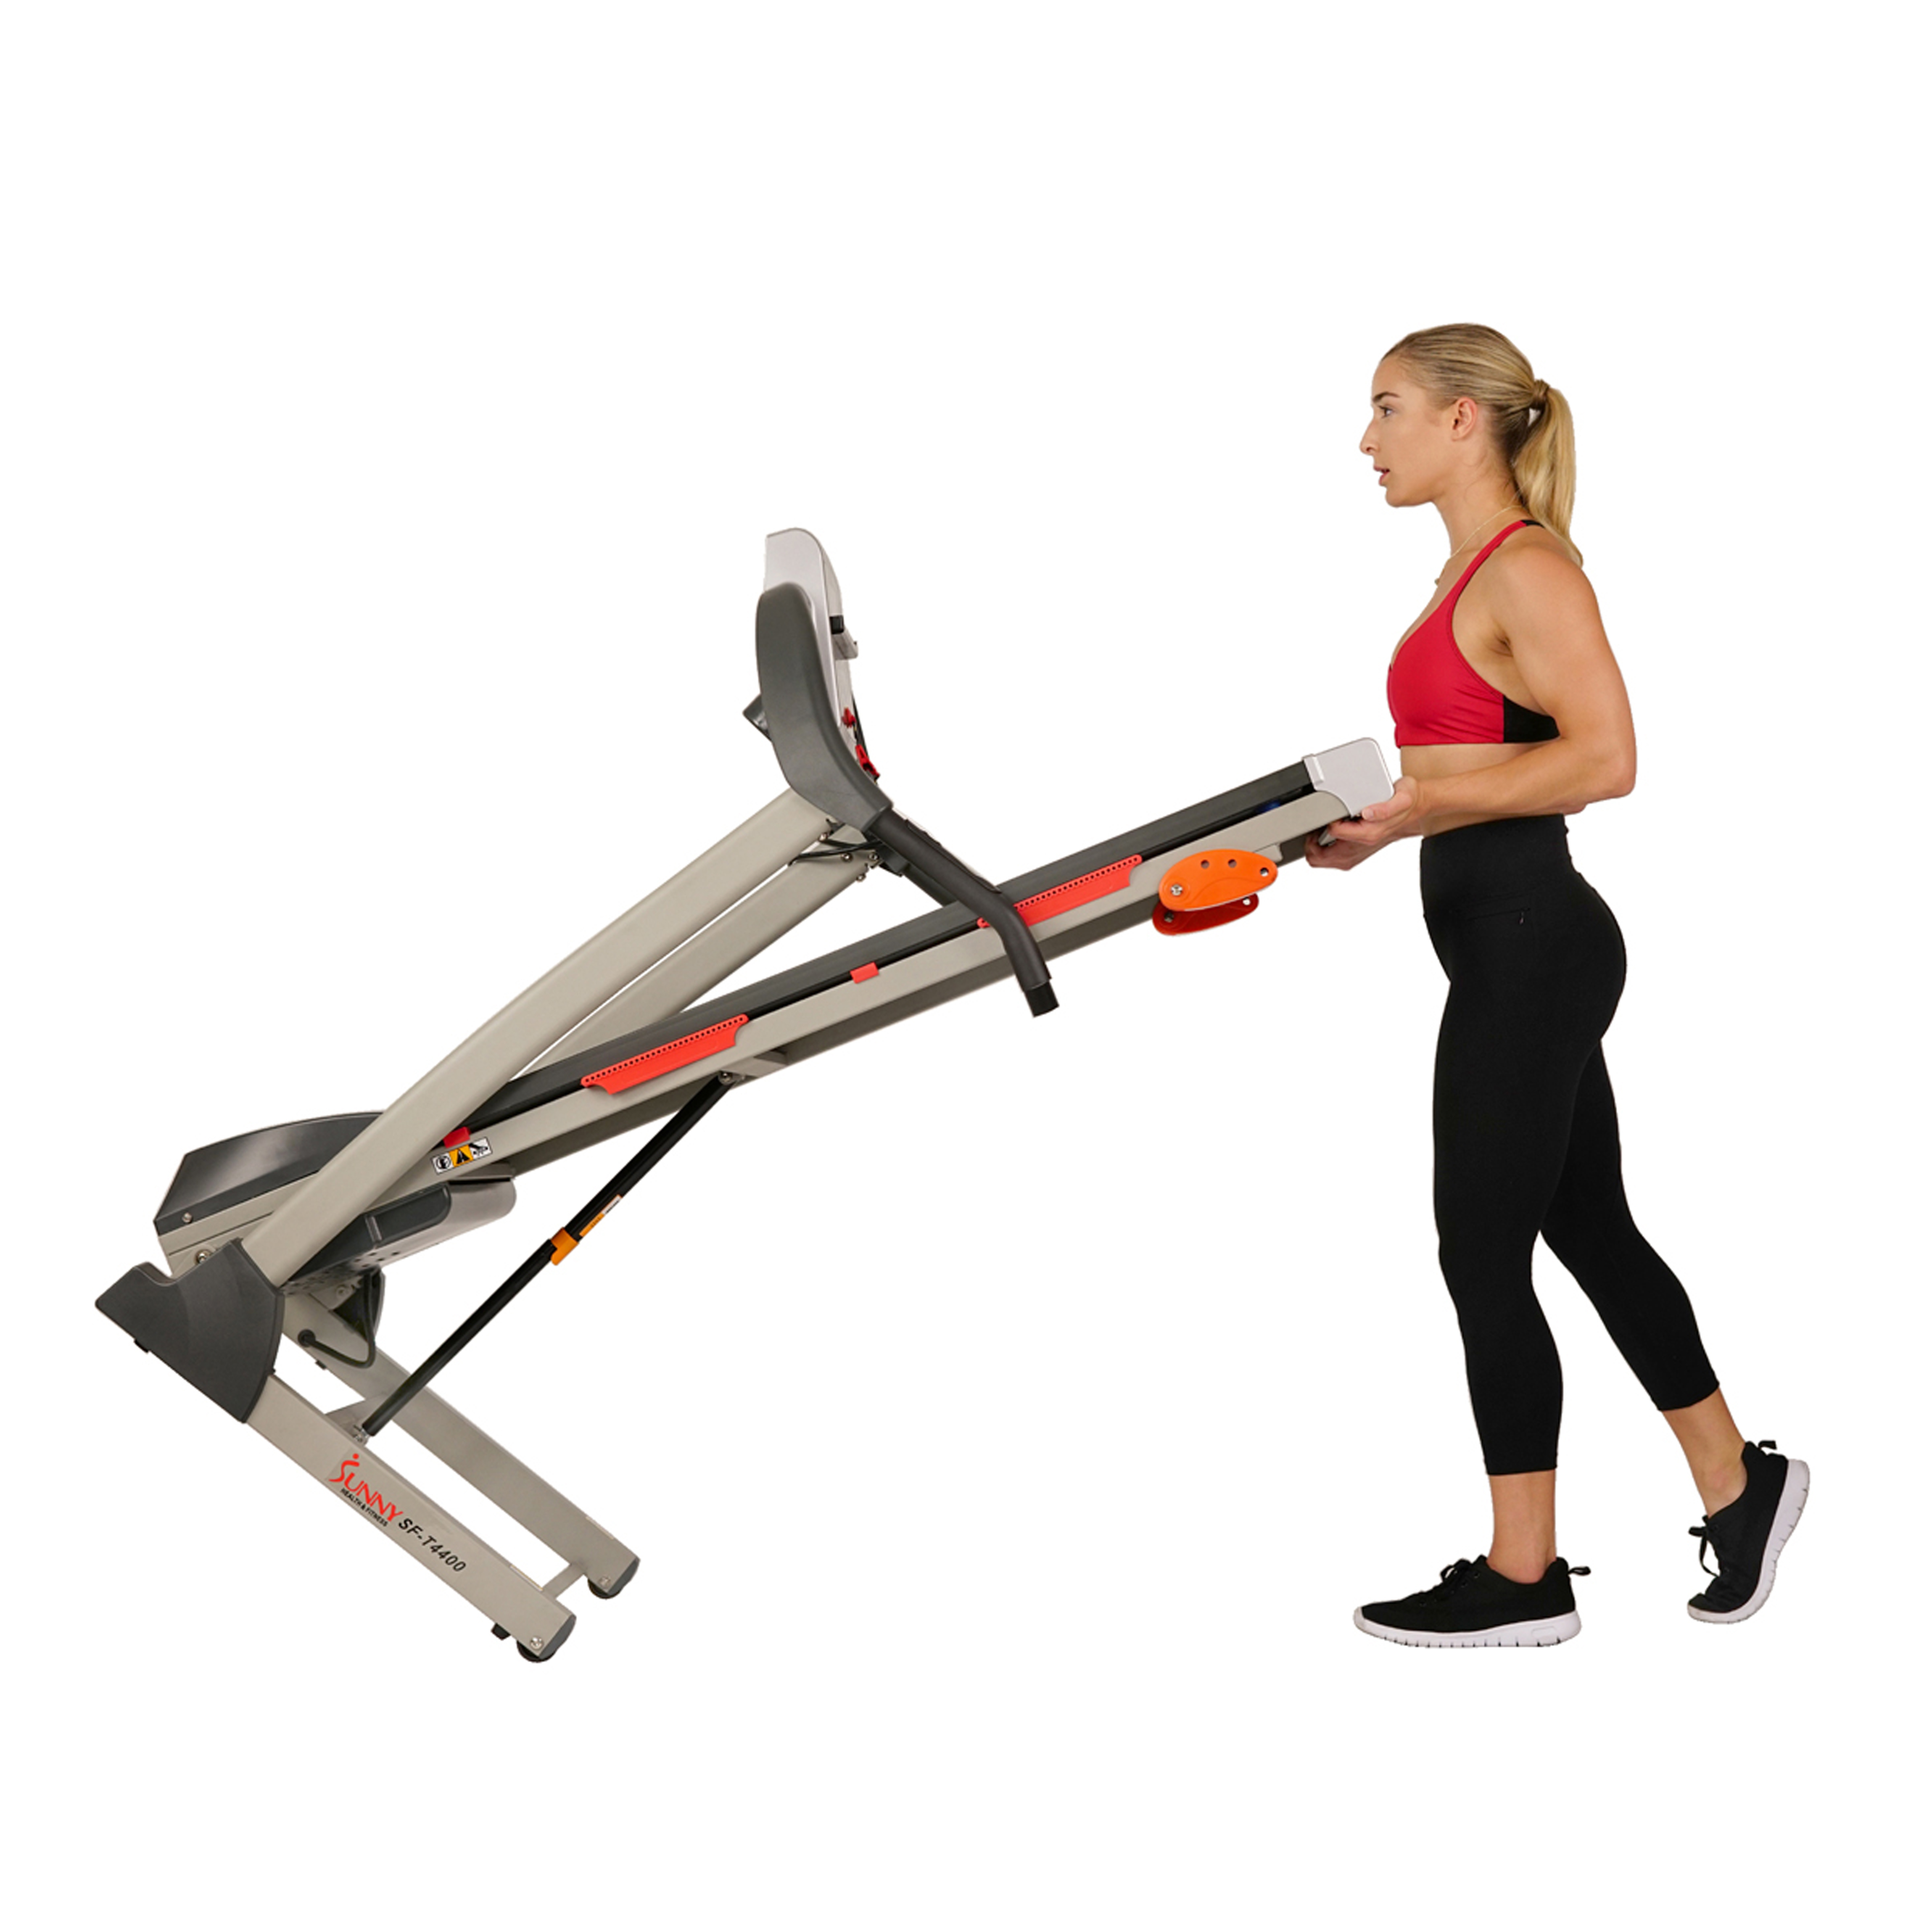 Sunny Health & Fitness Treadmill with Manual Incline, Pulse Sensors, Folding, LCD Monitor for Exercise SF-T4400 - image 9 of 13